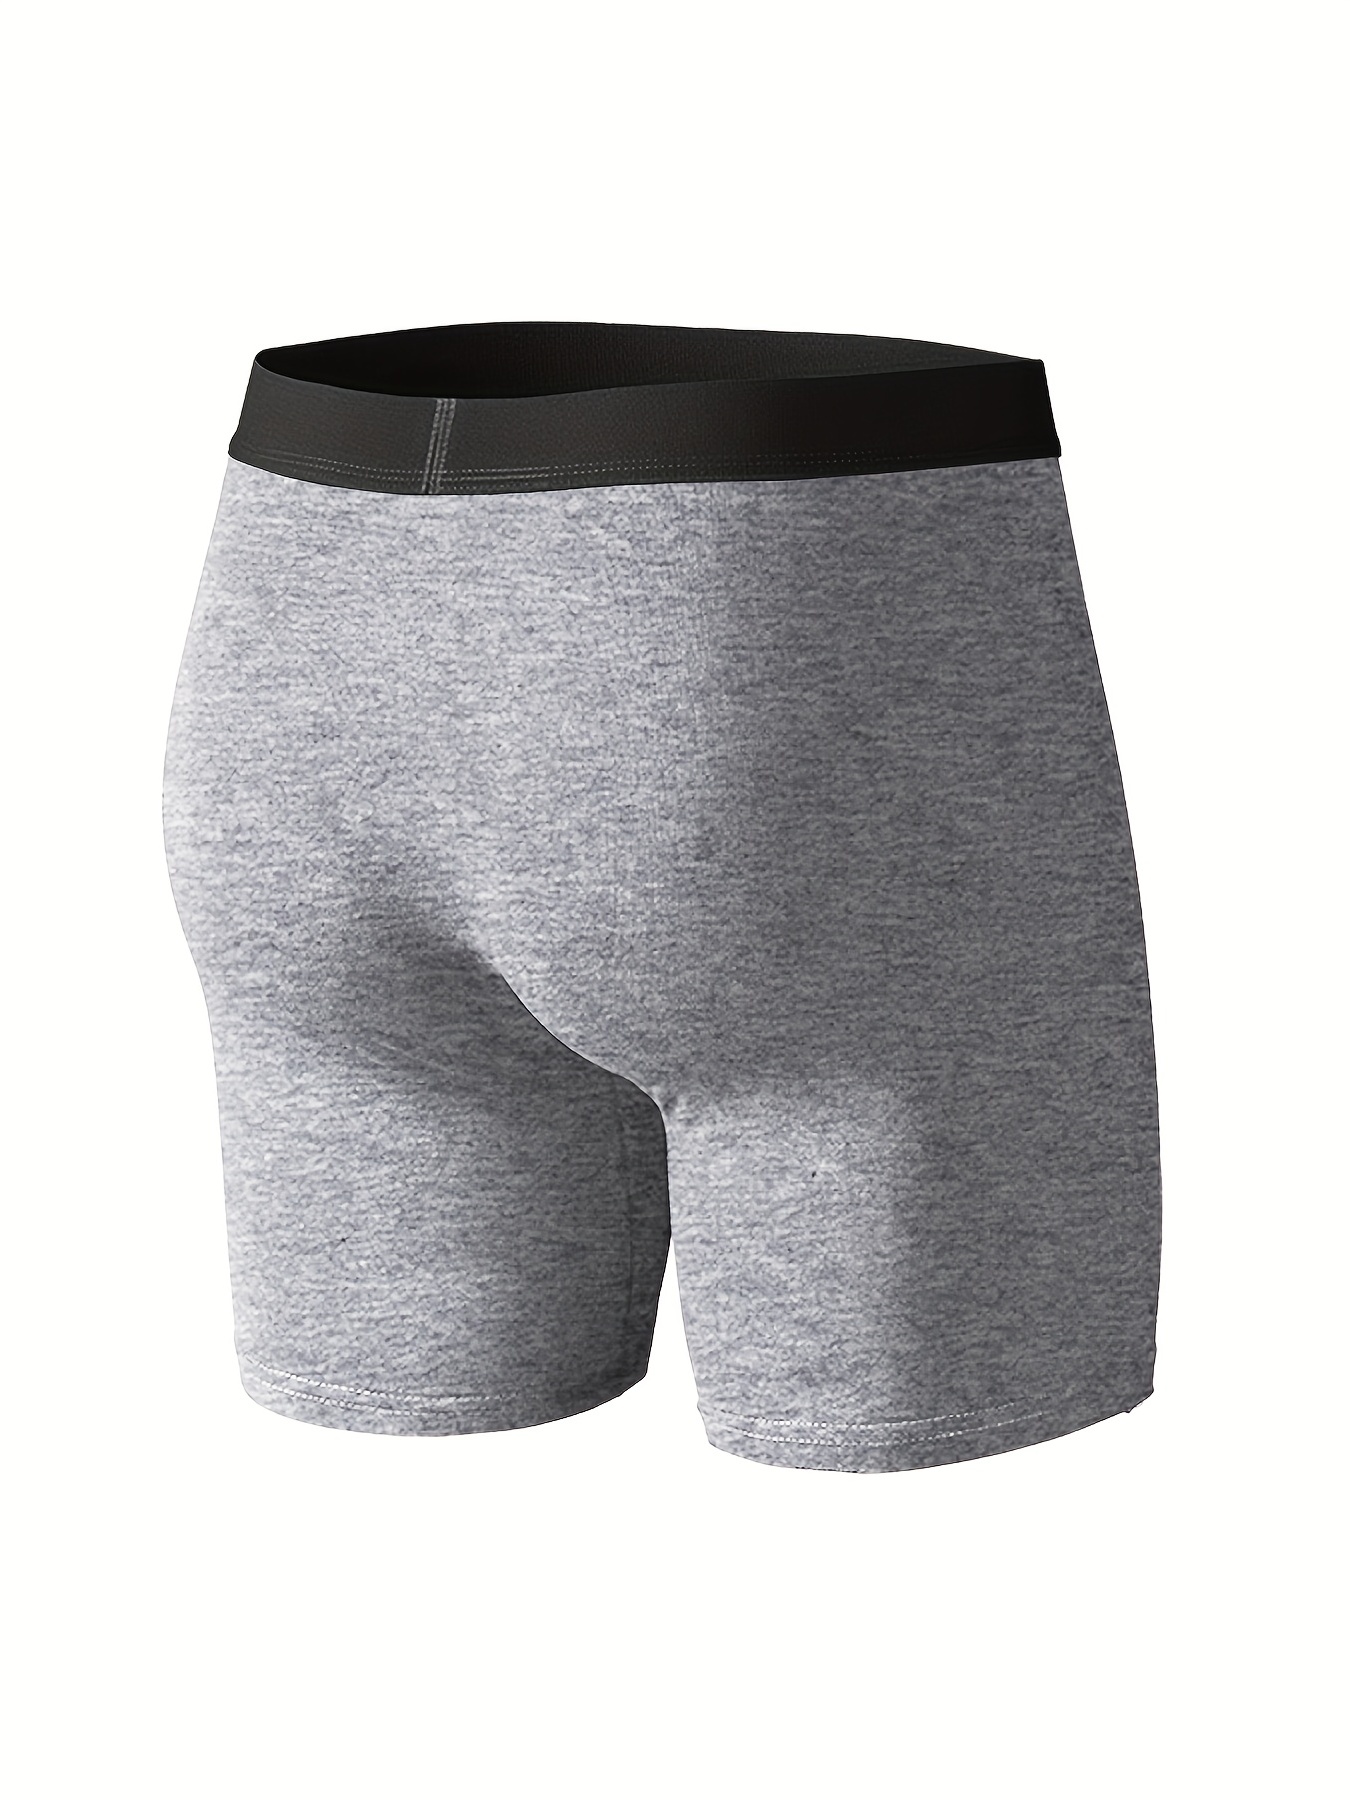  Eat Sleep Play Drums Repeat Men's Stretch Boxer Briefs  Breathable and Soft Trunks Underwear : Sports & Outdoors